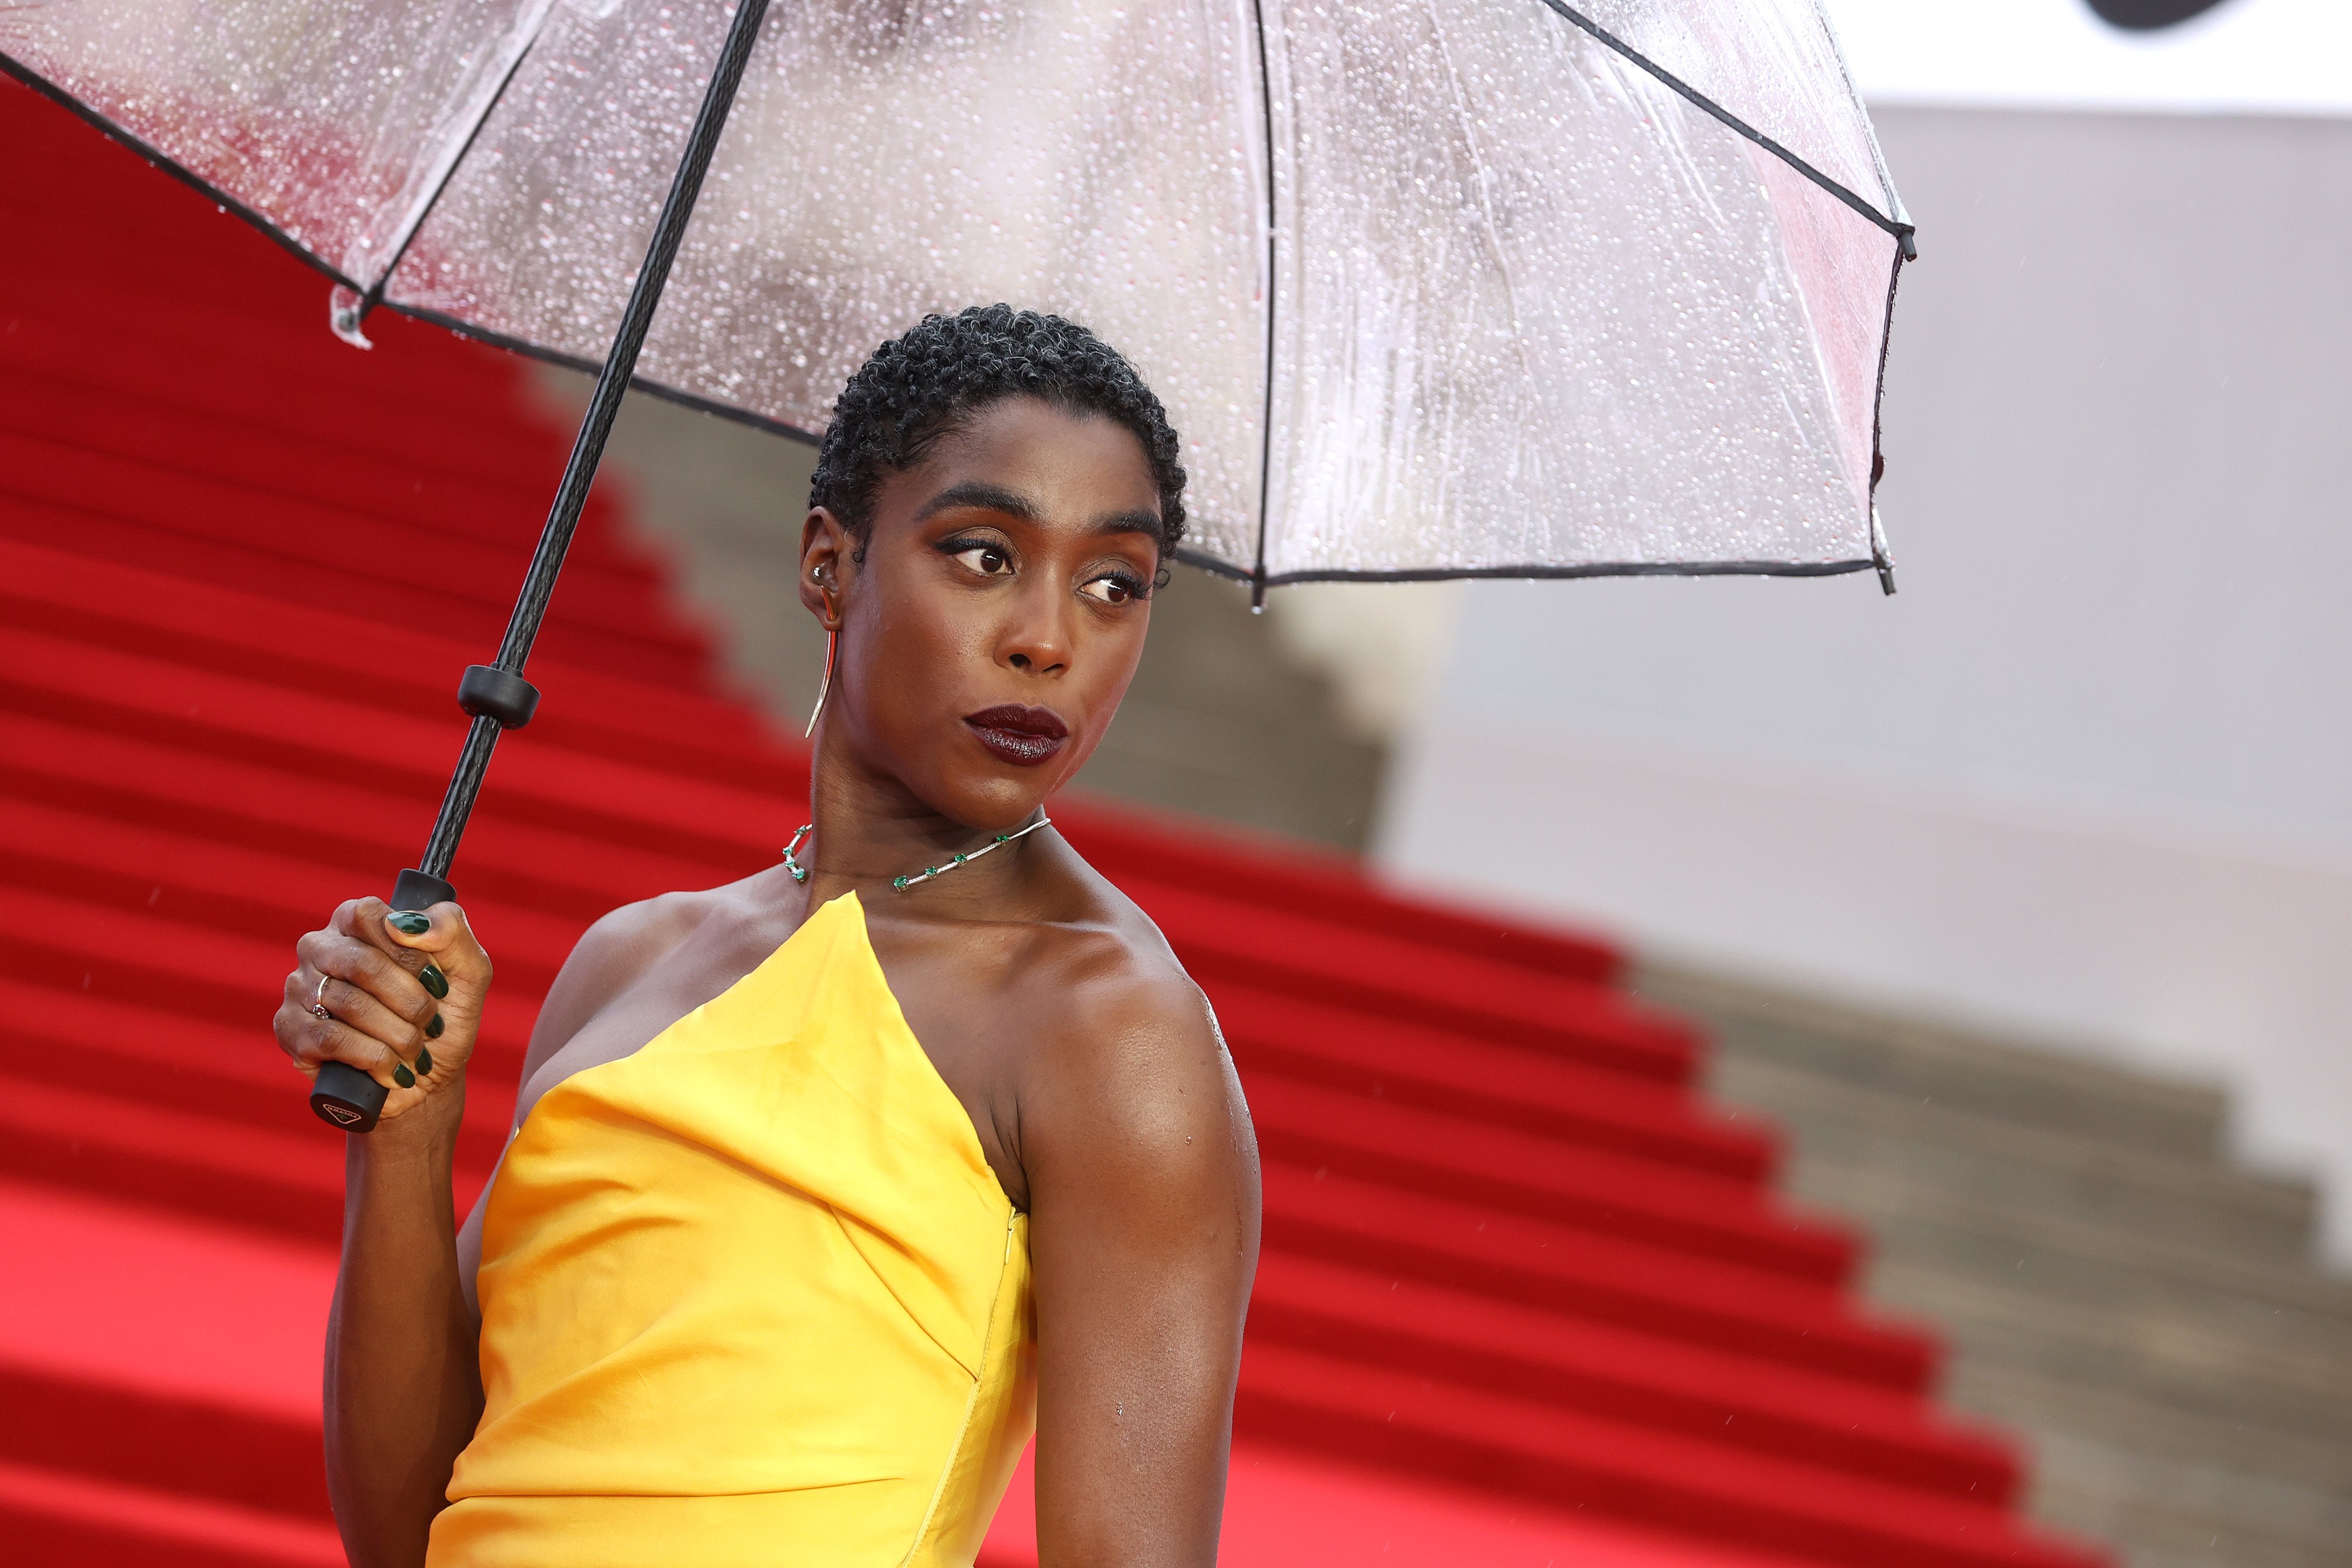 Lashana Lynch, star of the new James Bond movie, poses with an umbrella on the red carpet